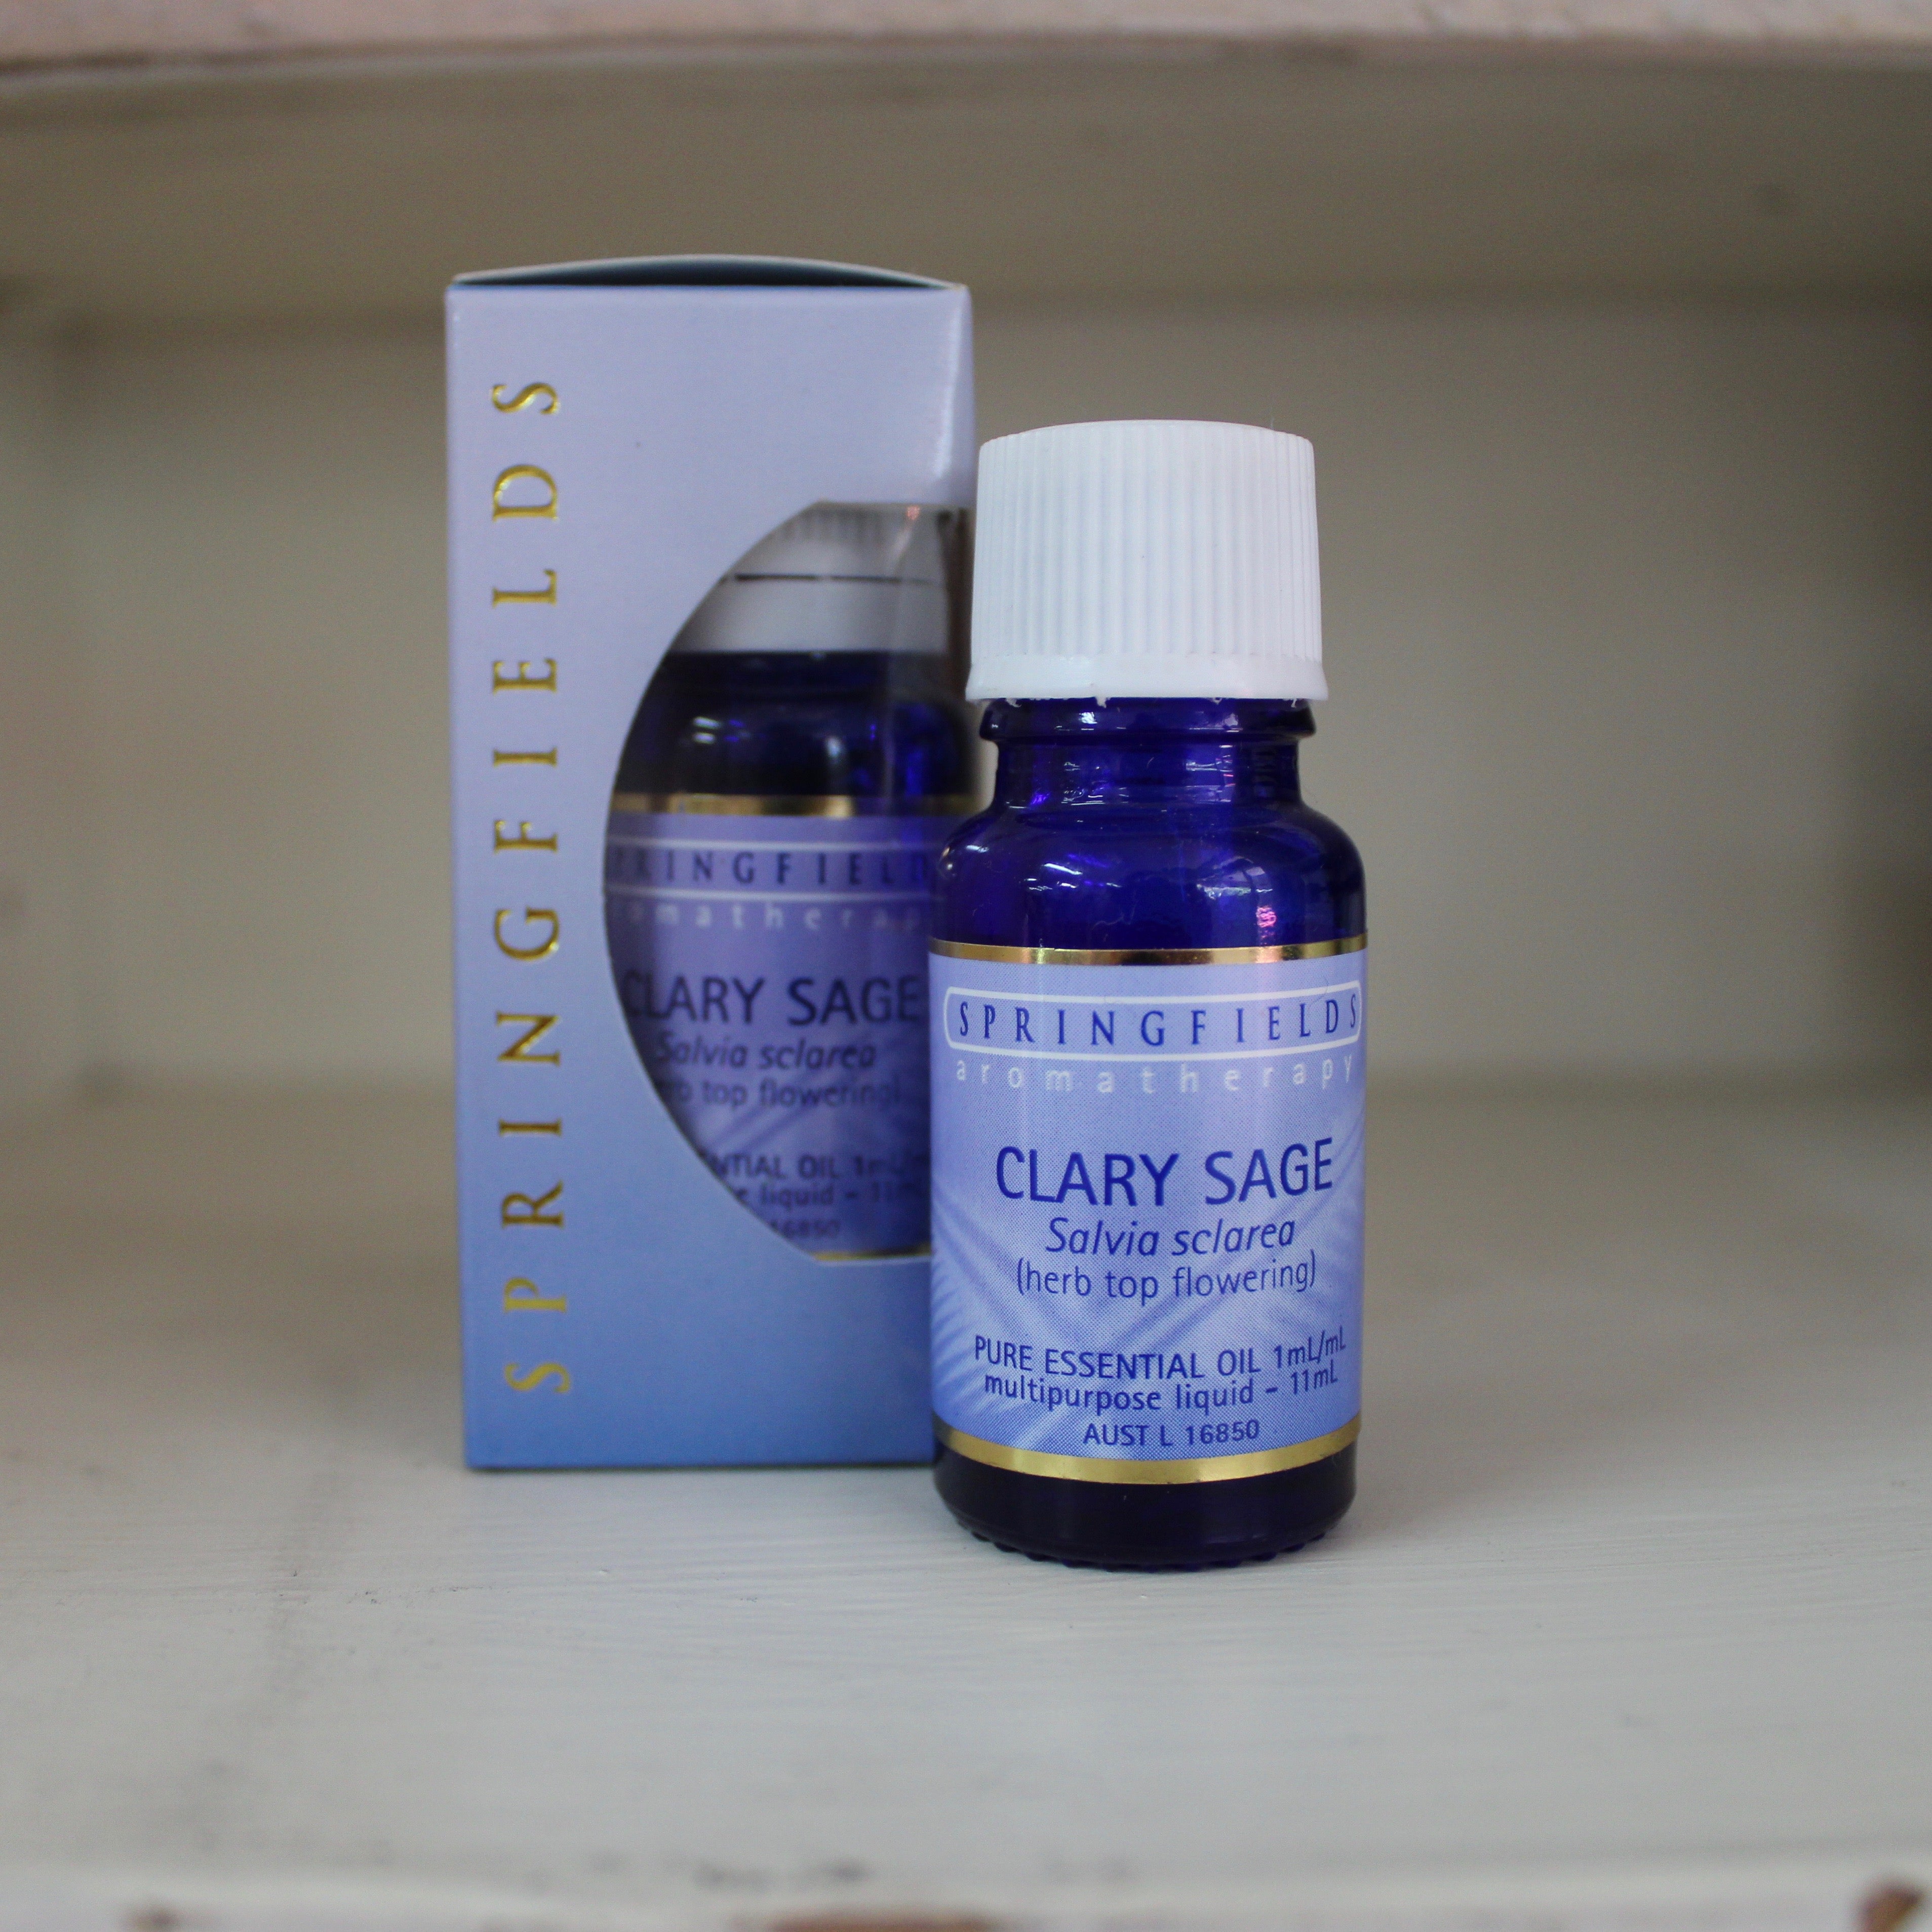 Springfields Clary Sage 11ml Pure Essential Oil